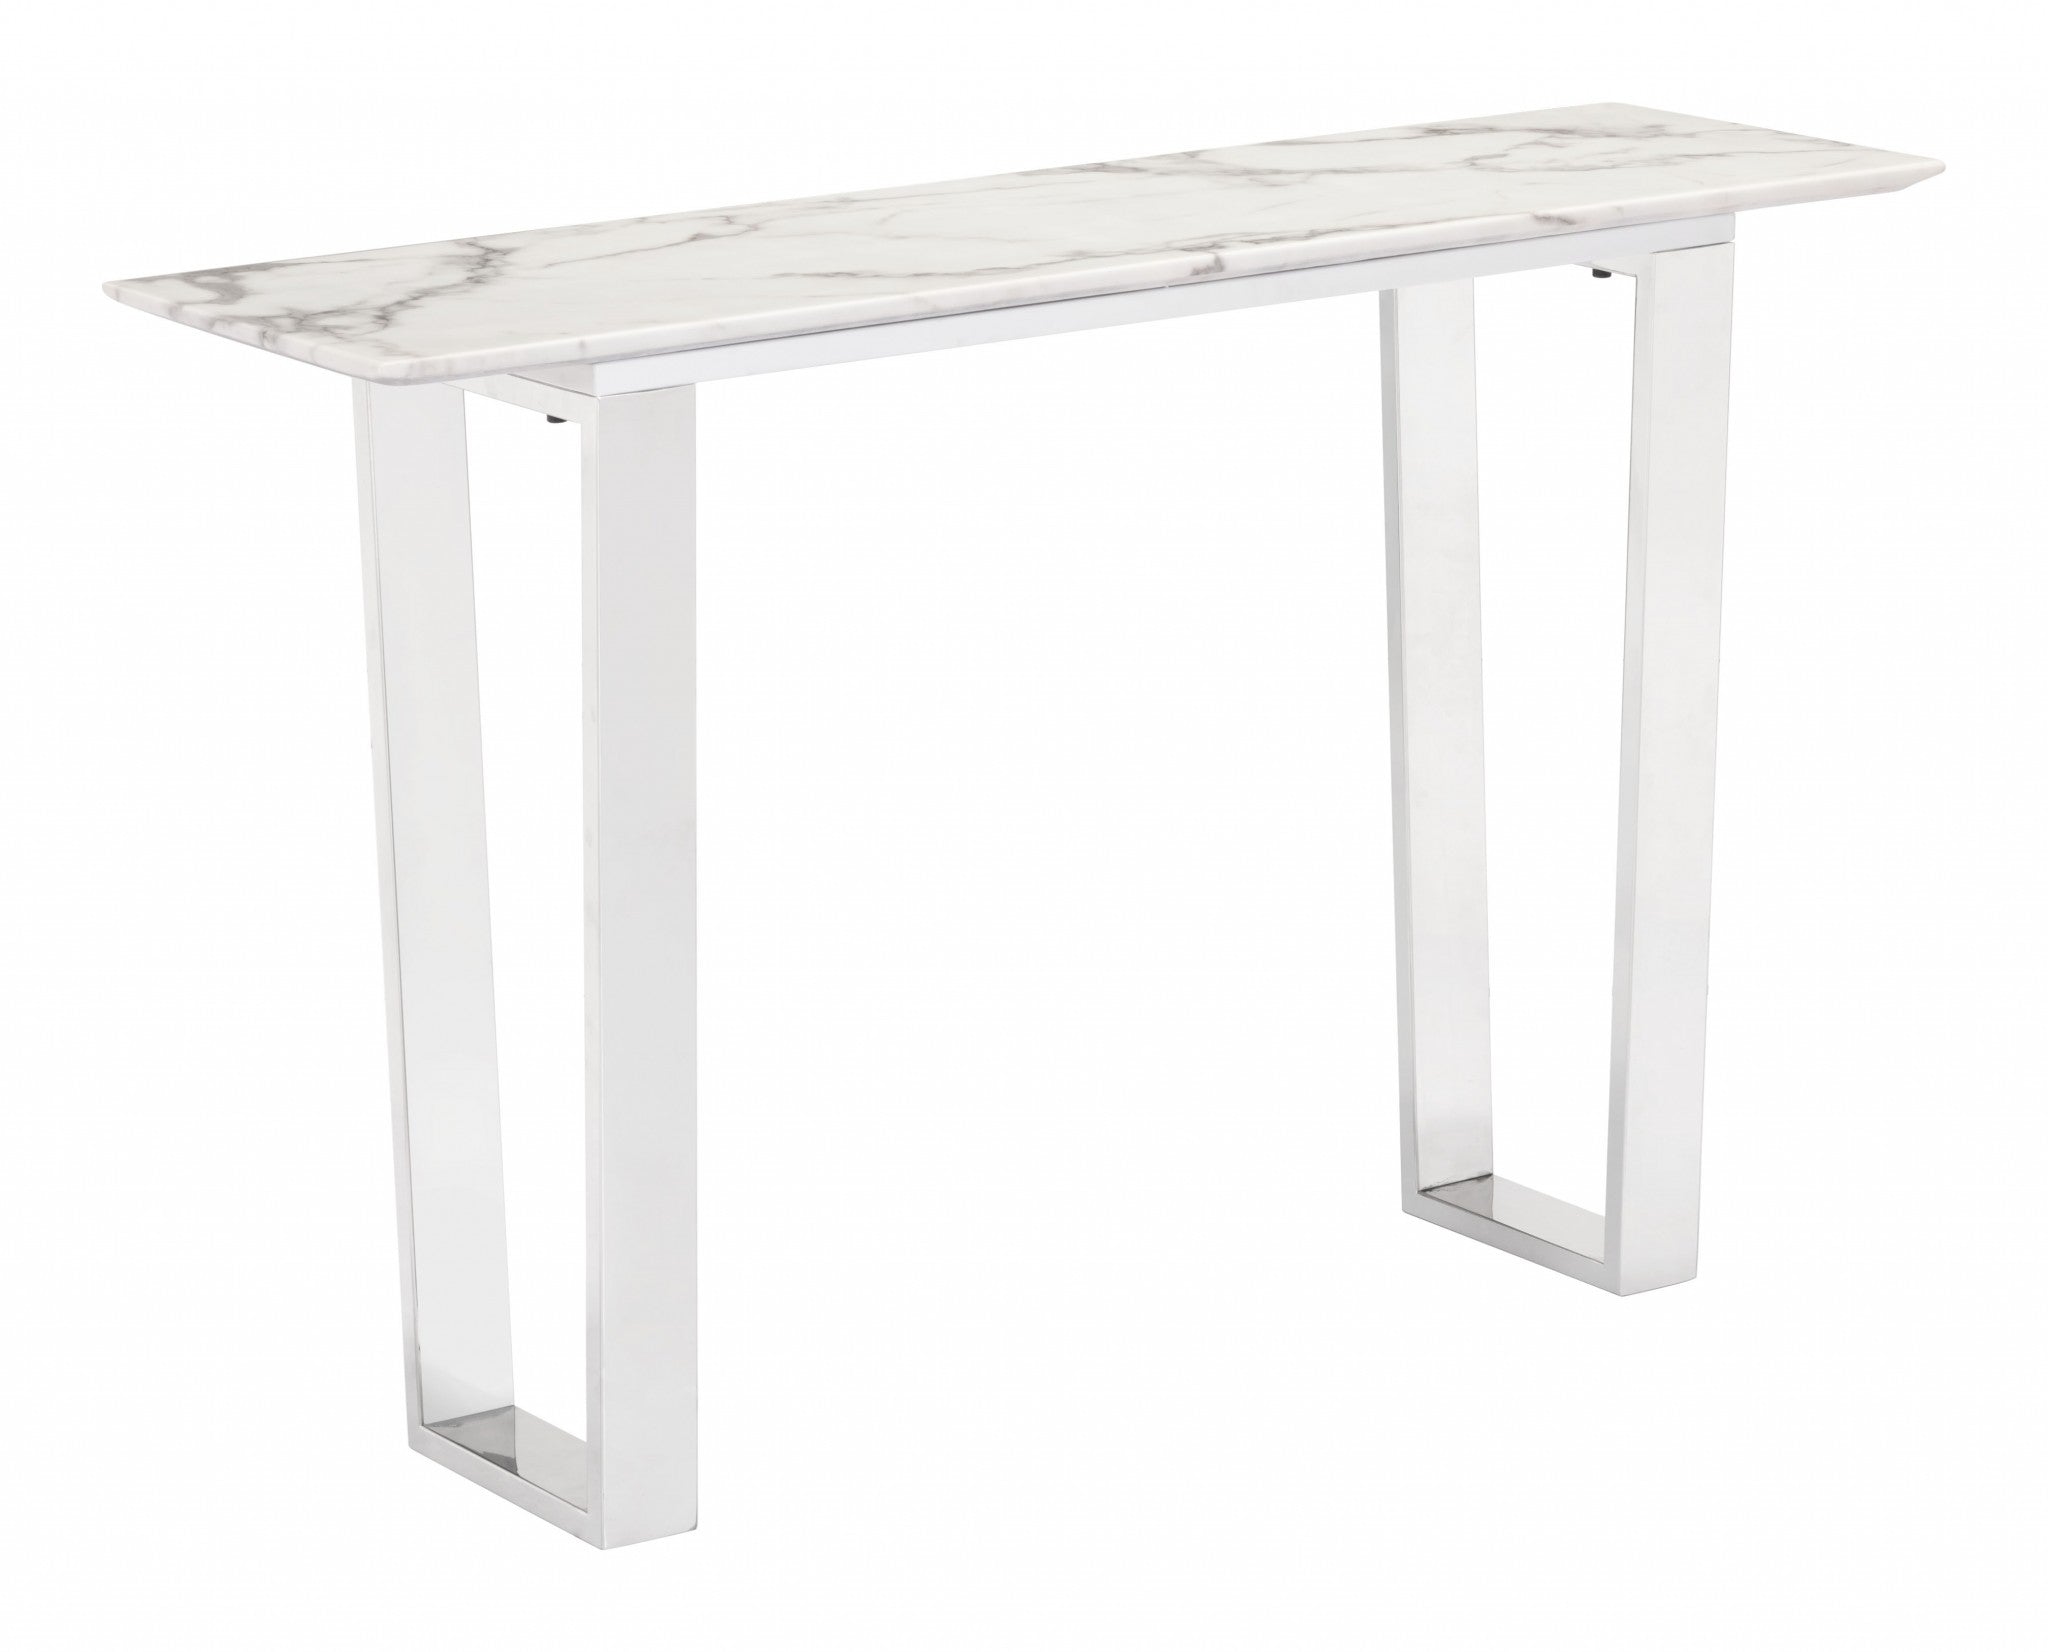 Designer's Choice White Faux Marble and Steel Console Table